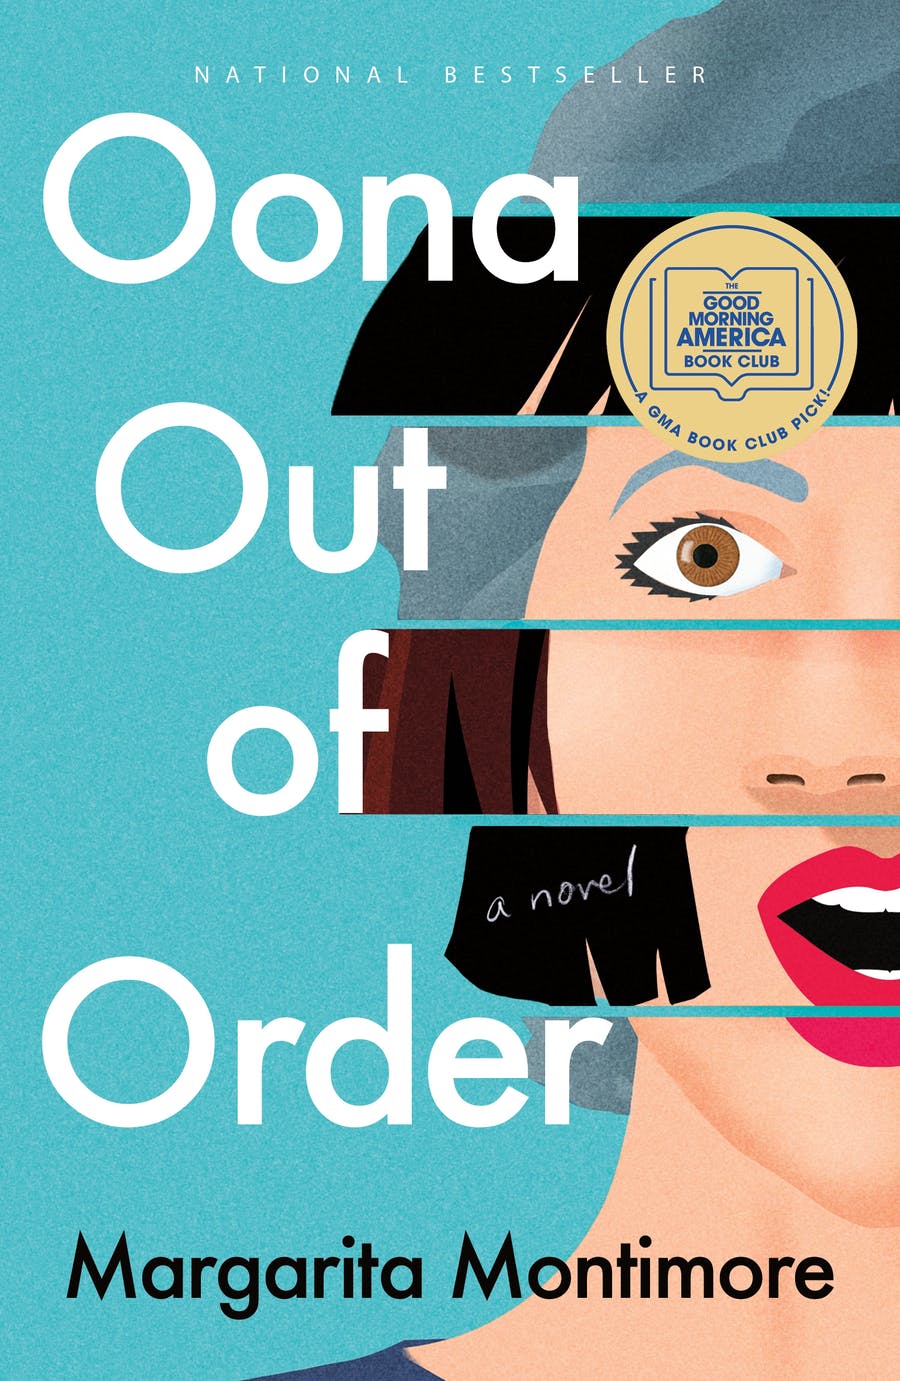 Oona Out of Order (2020, Flatiron)